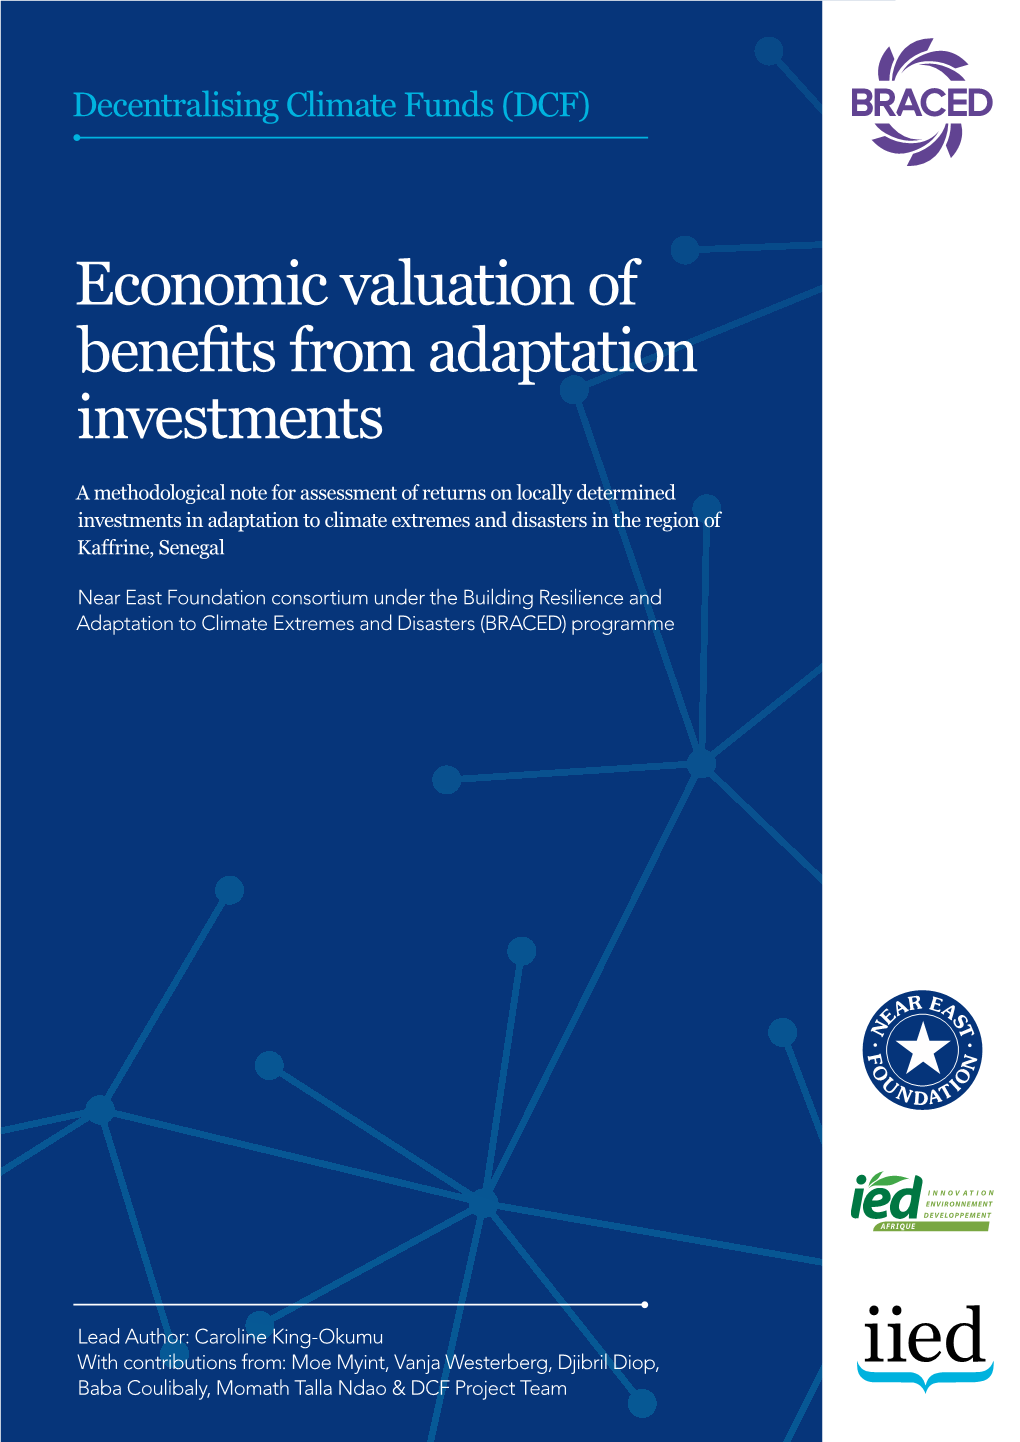 Economic Valuation of Benefits from Adaptation Investments